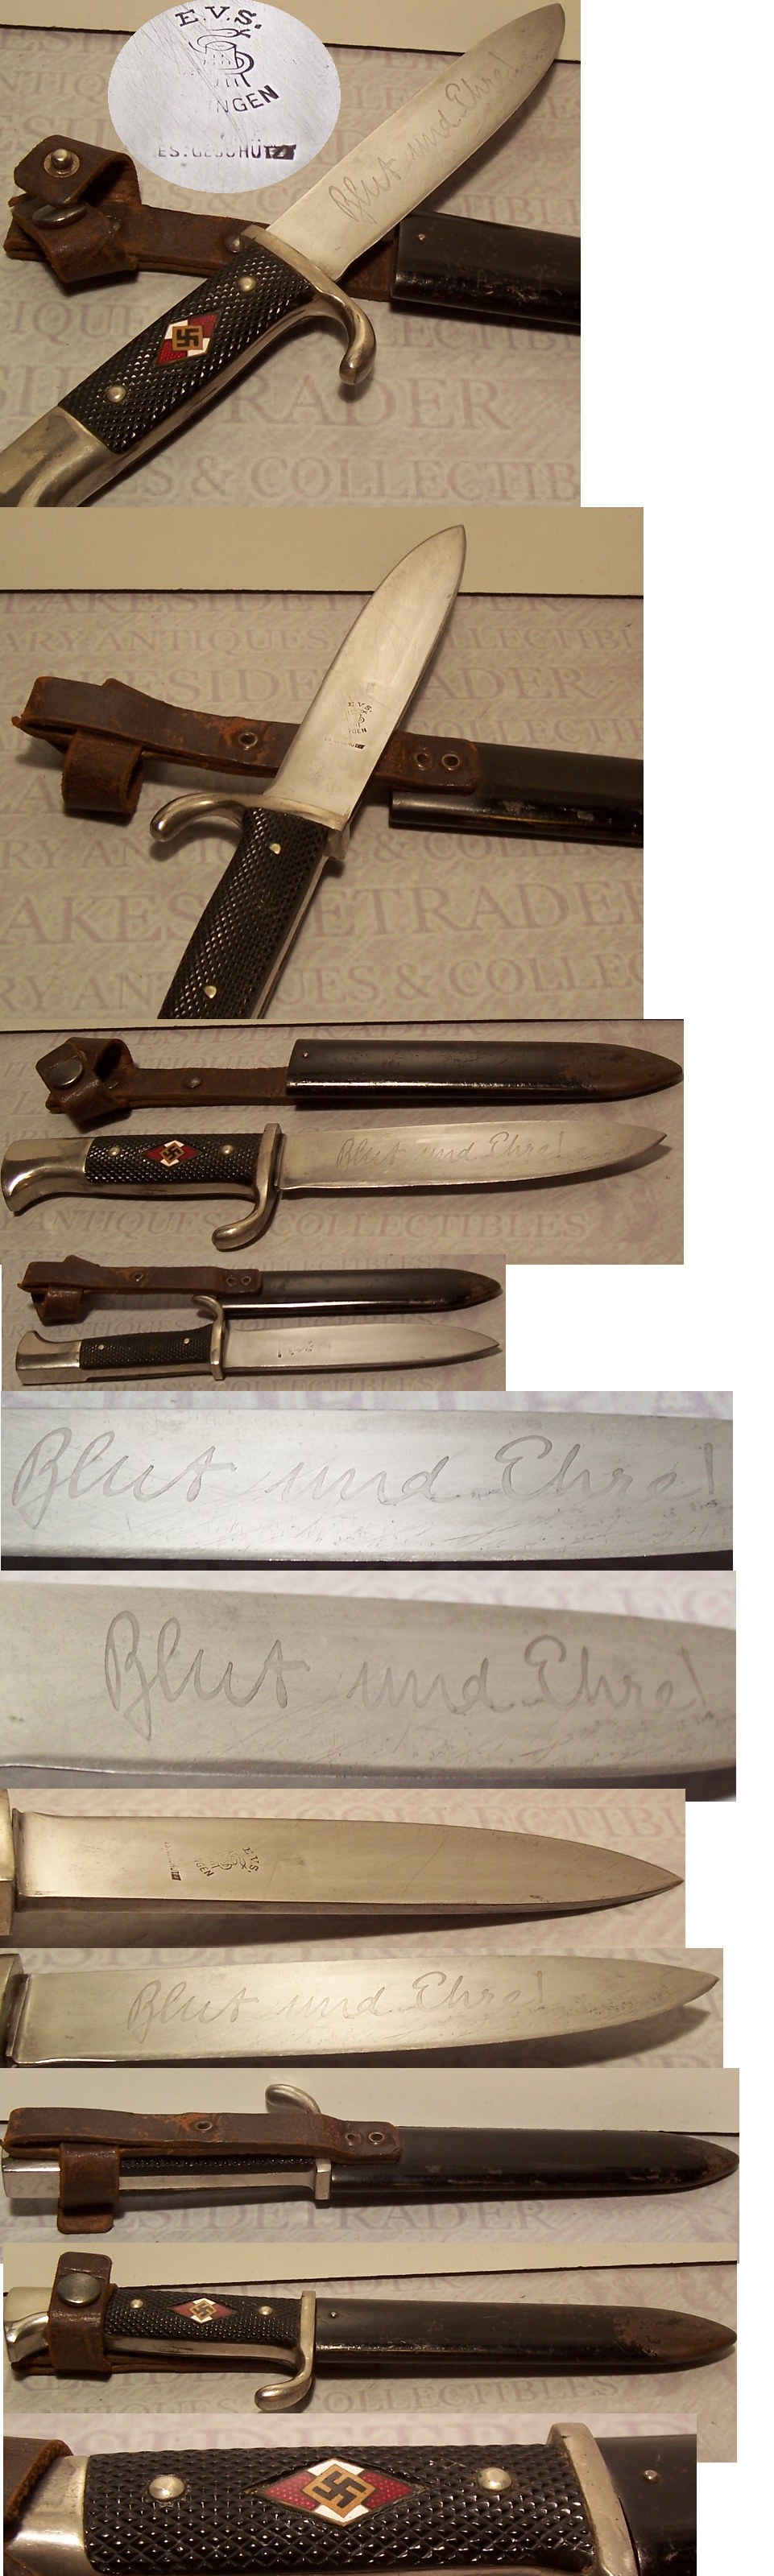 Early Voos HJ Knife